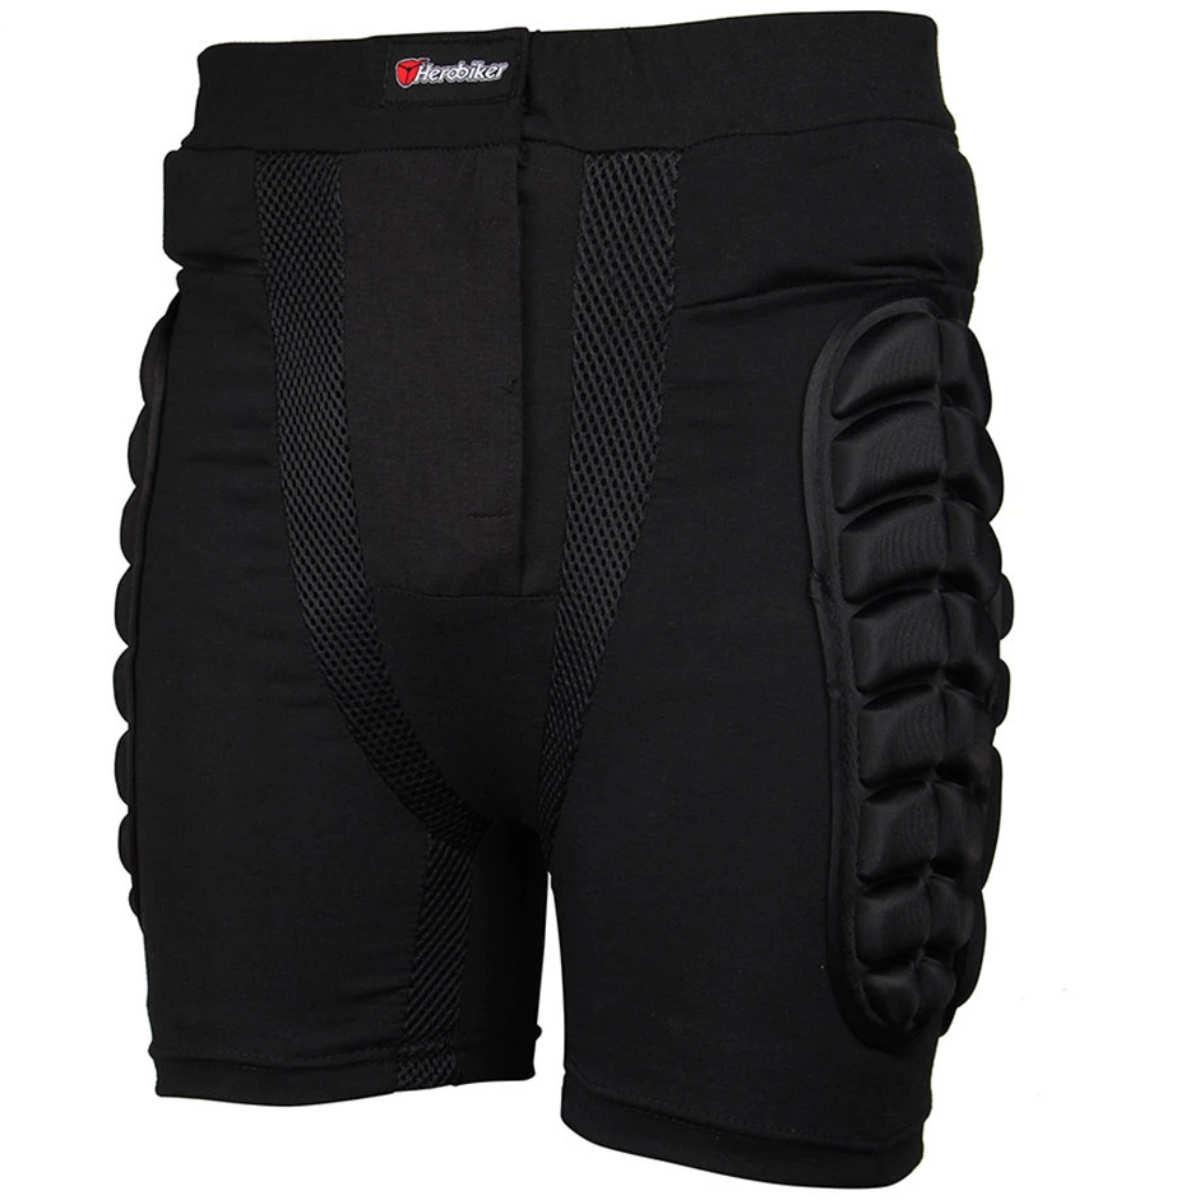 A black Motorcycle Protective Armor Pants for Men & Women with padding on the knees, serving as protective gear.